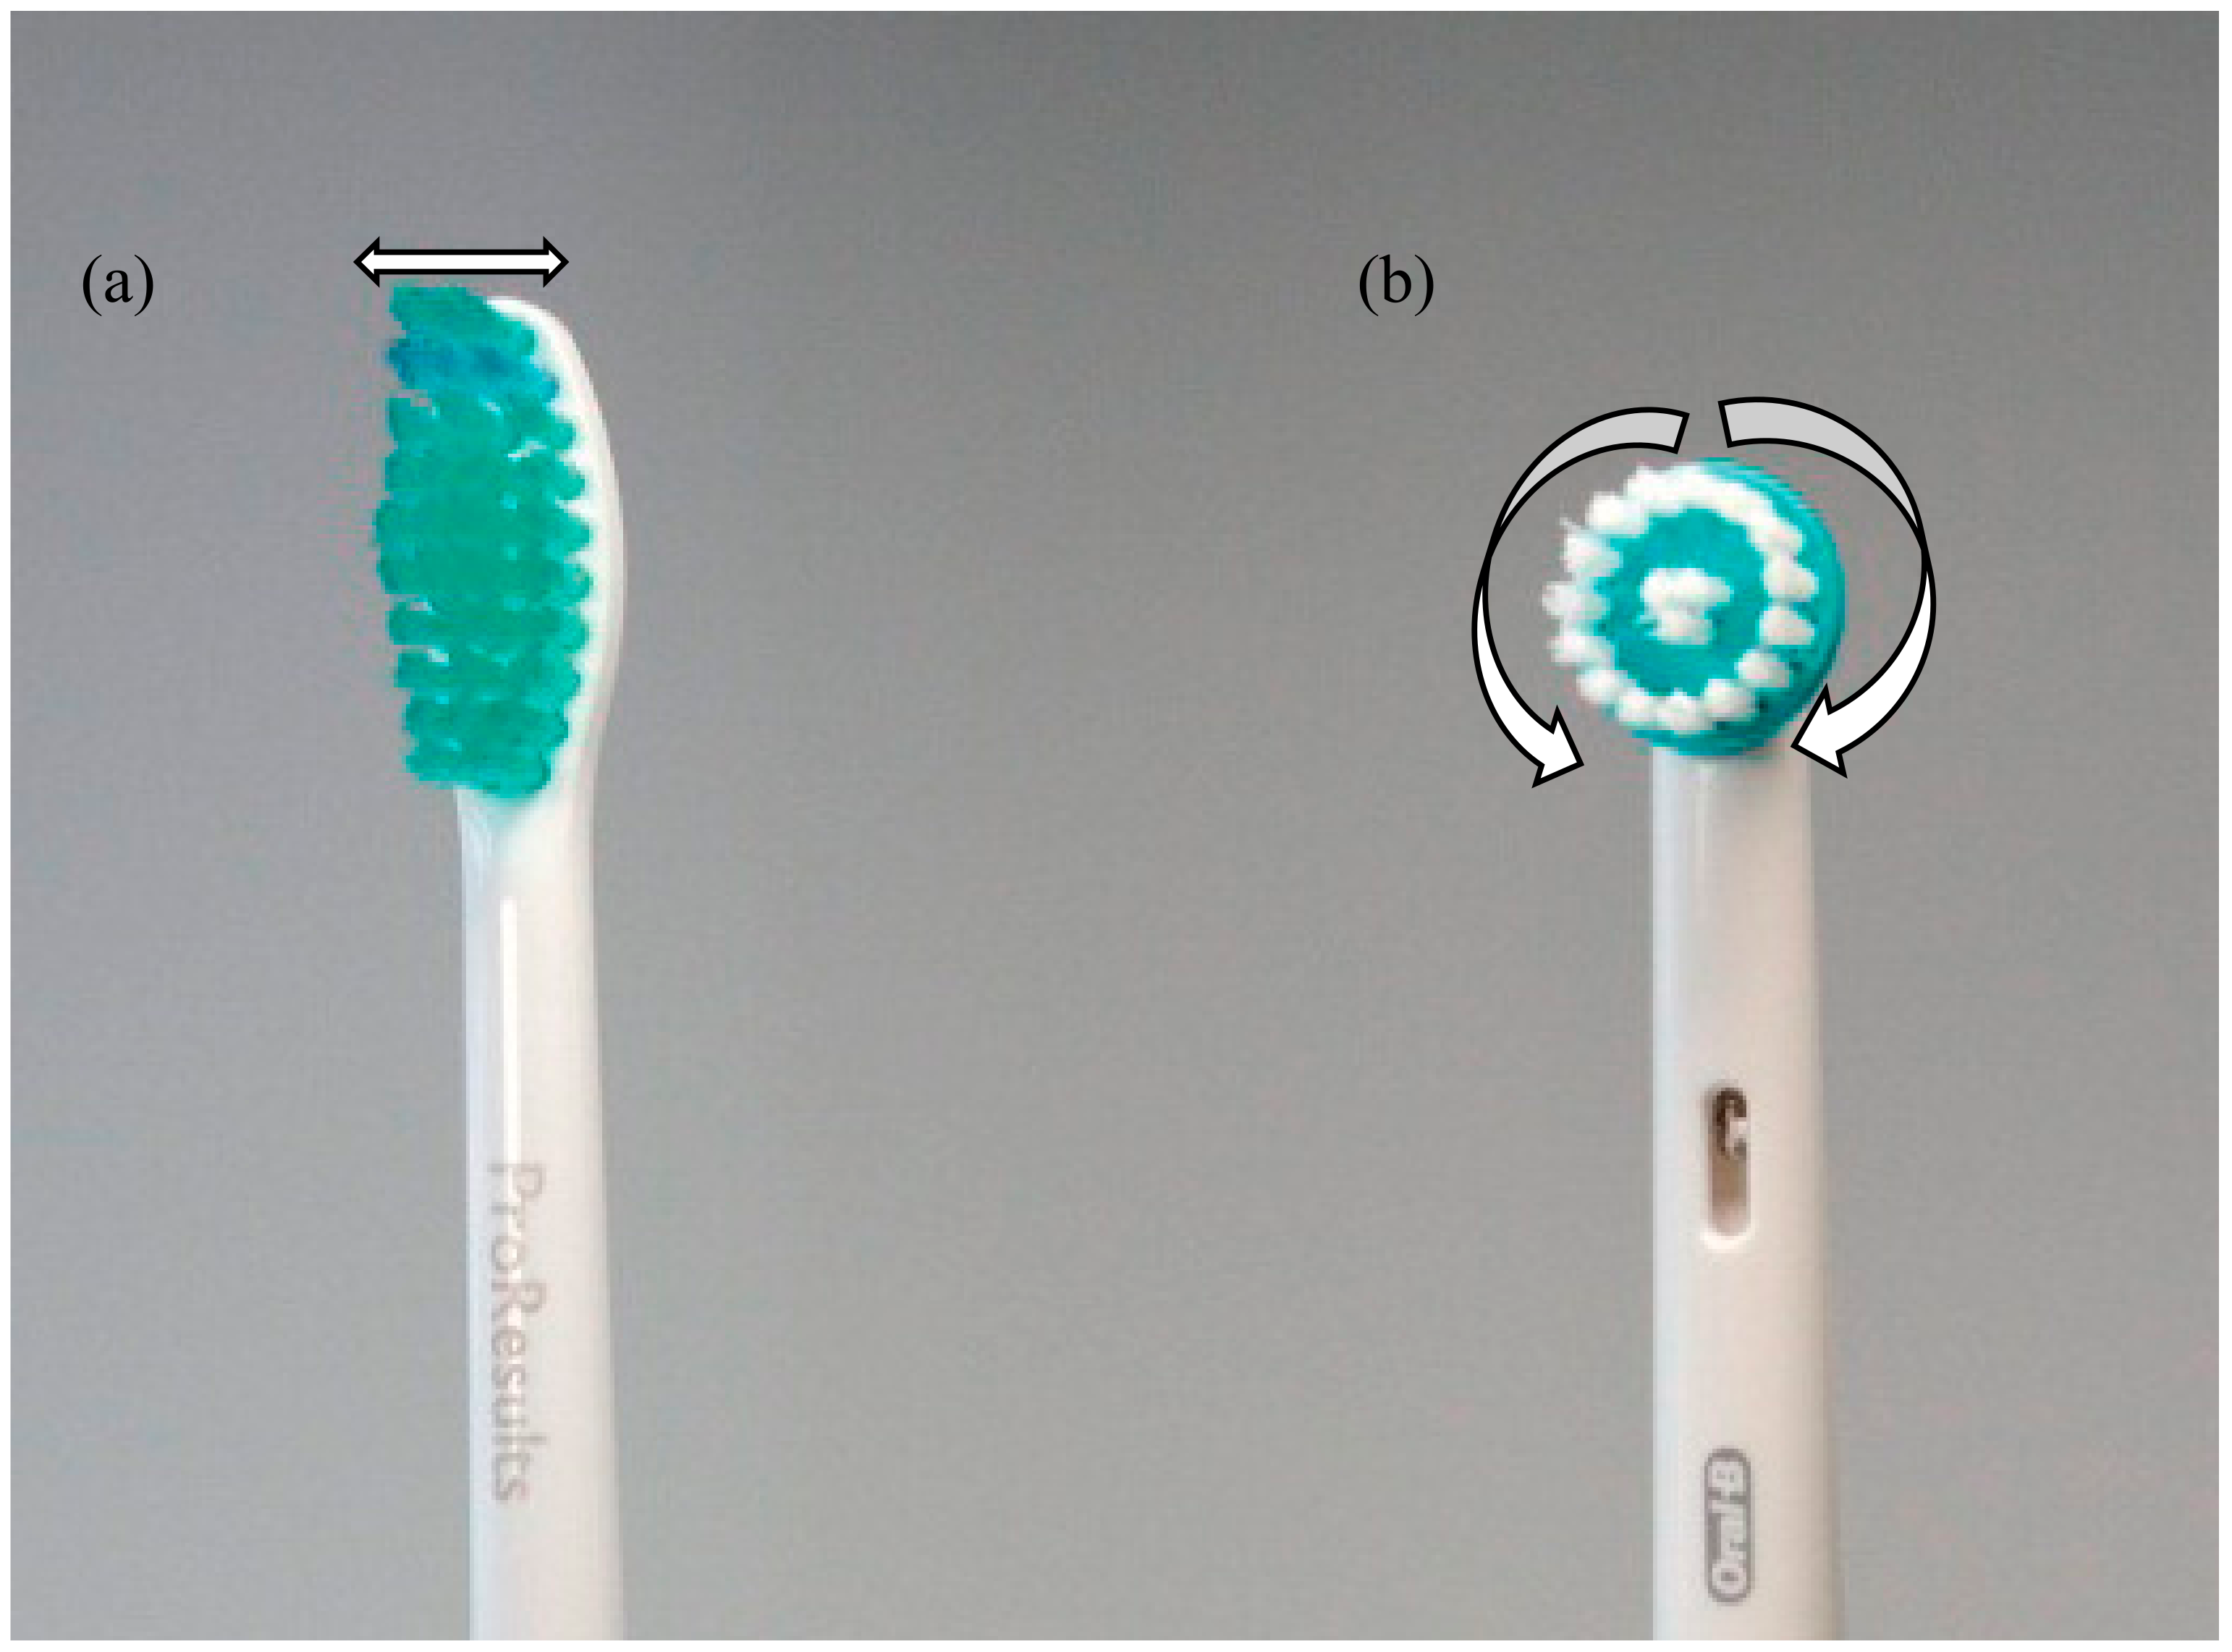 Dentistry Journal | Free Full-Text | Safety and Design Aspects of Powered Toothbrush—A Narrative Review